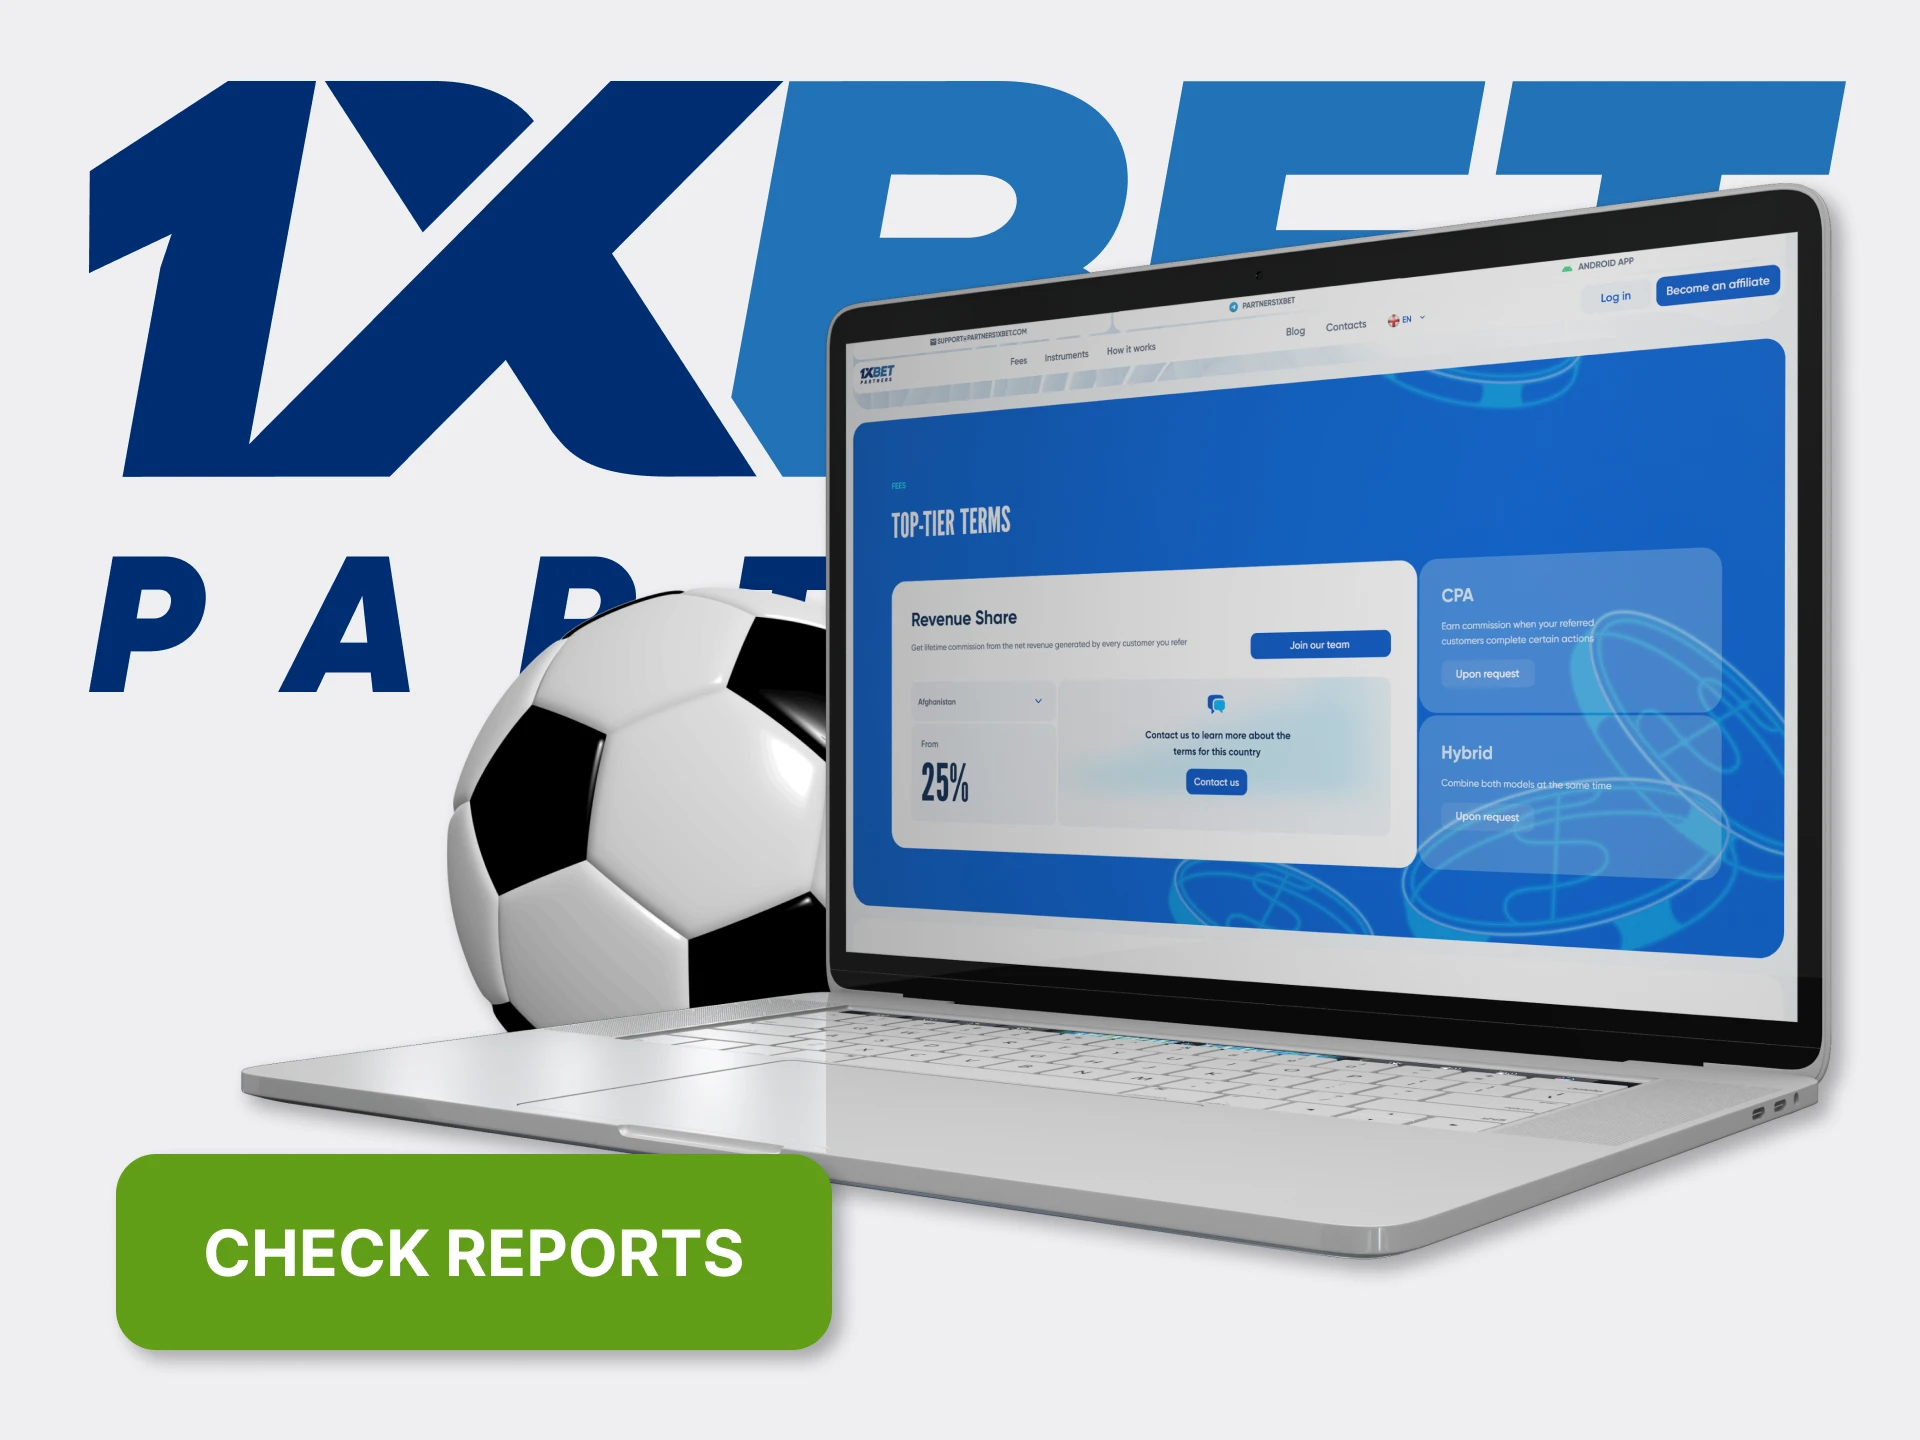 Get statistics and see reports in 1xBet's affiliate program.